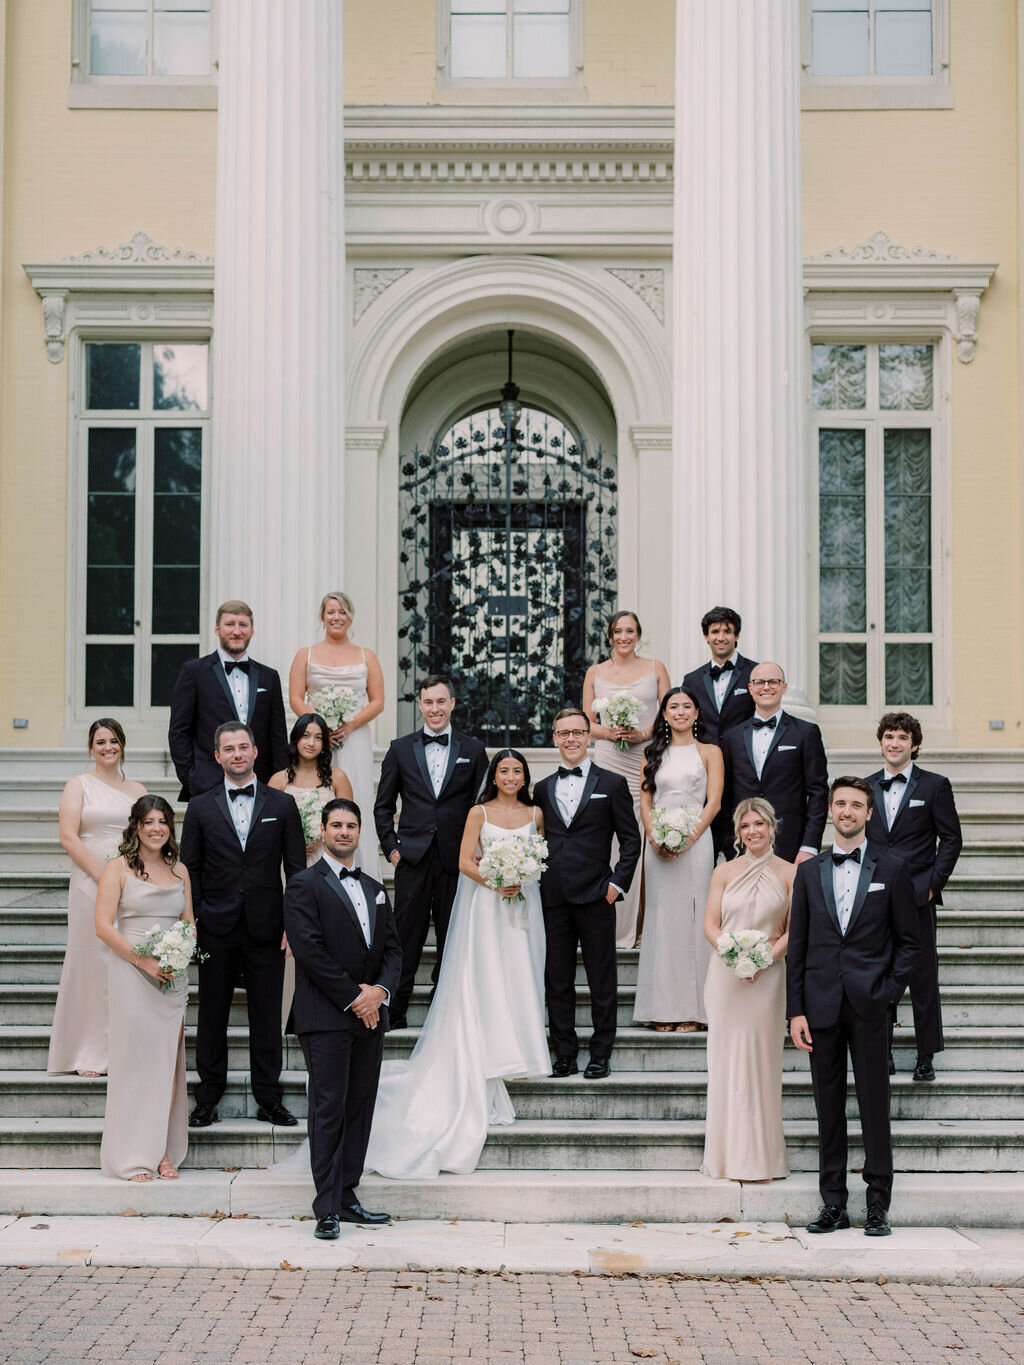 The black tie bridal party standing on the stairs with the bridesmaids wearing champagne-colored silk slip dresses and groomsmen wearing black tuxedos.